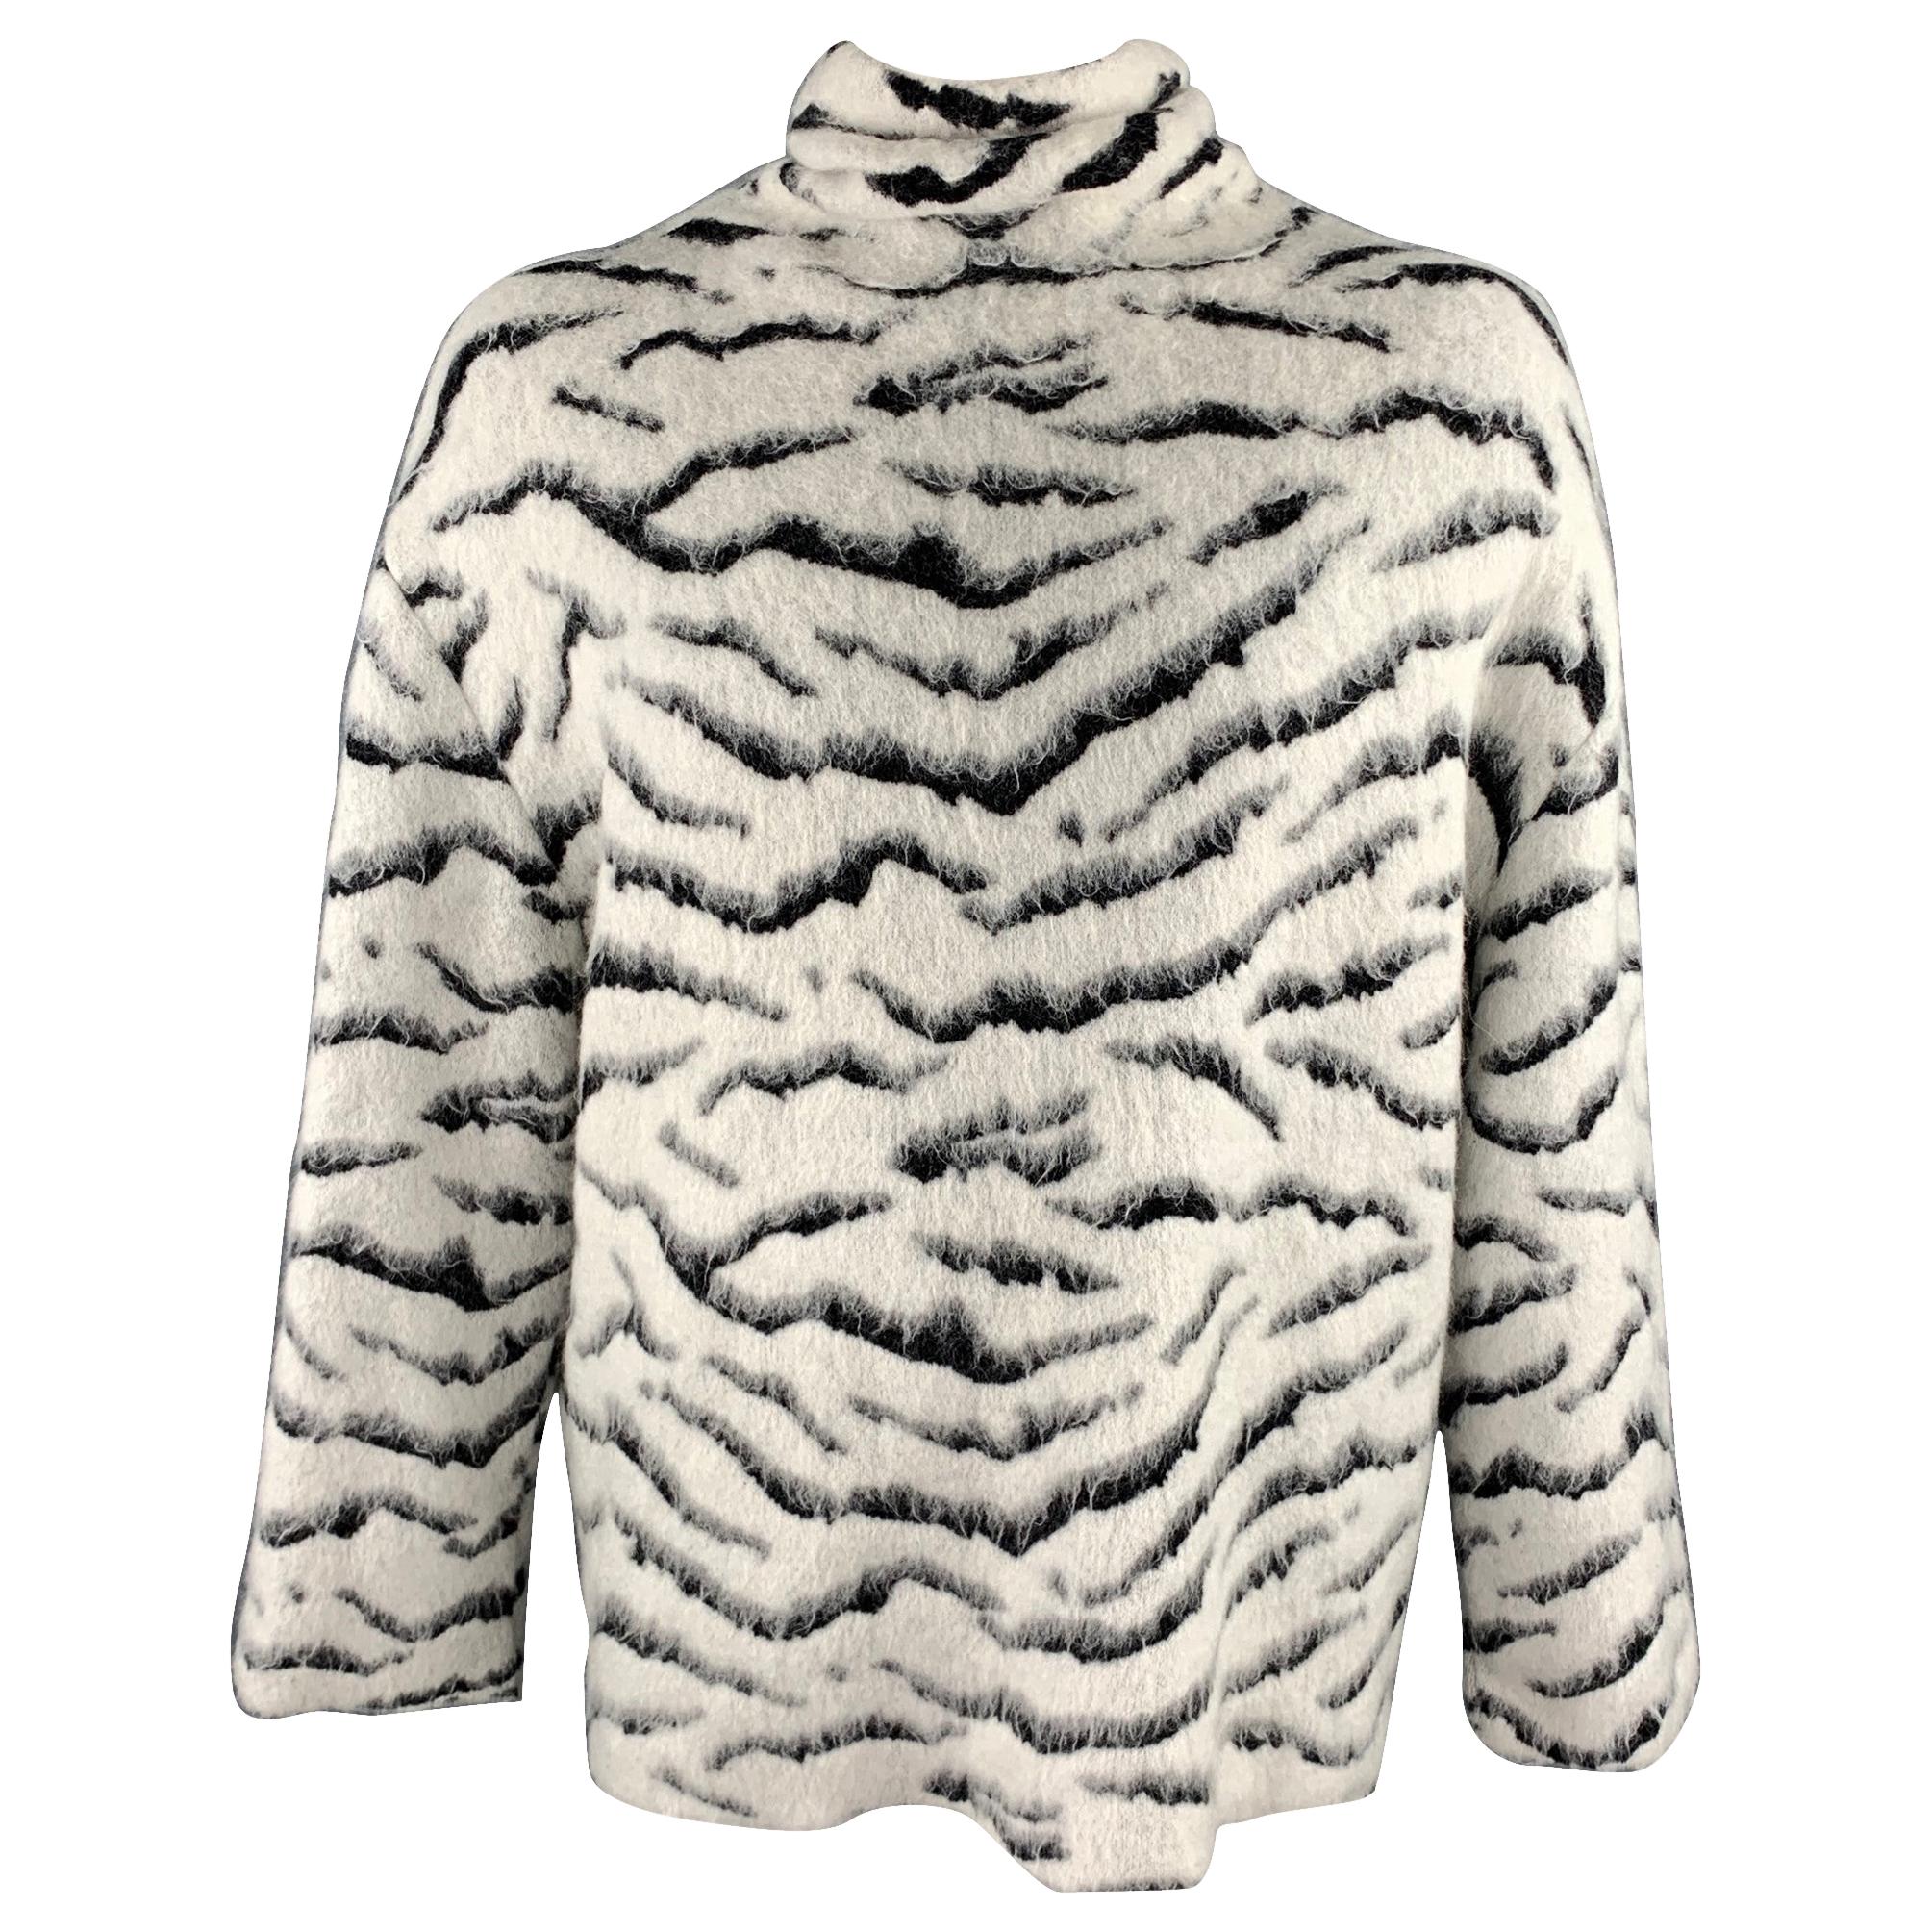 GIVENCHY Size XS White & Black Tiger Mohair Blend Turtleneck Sweater